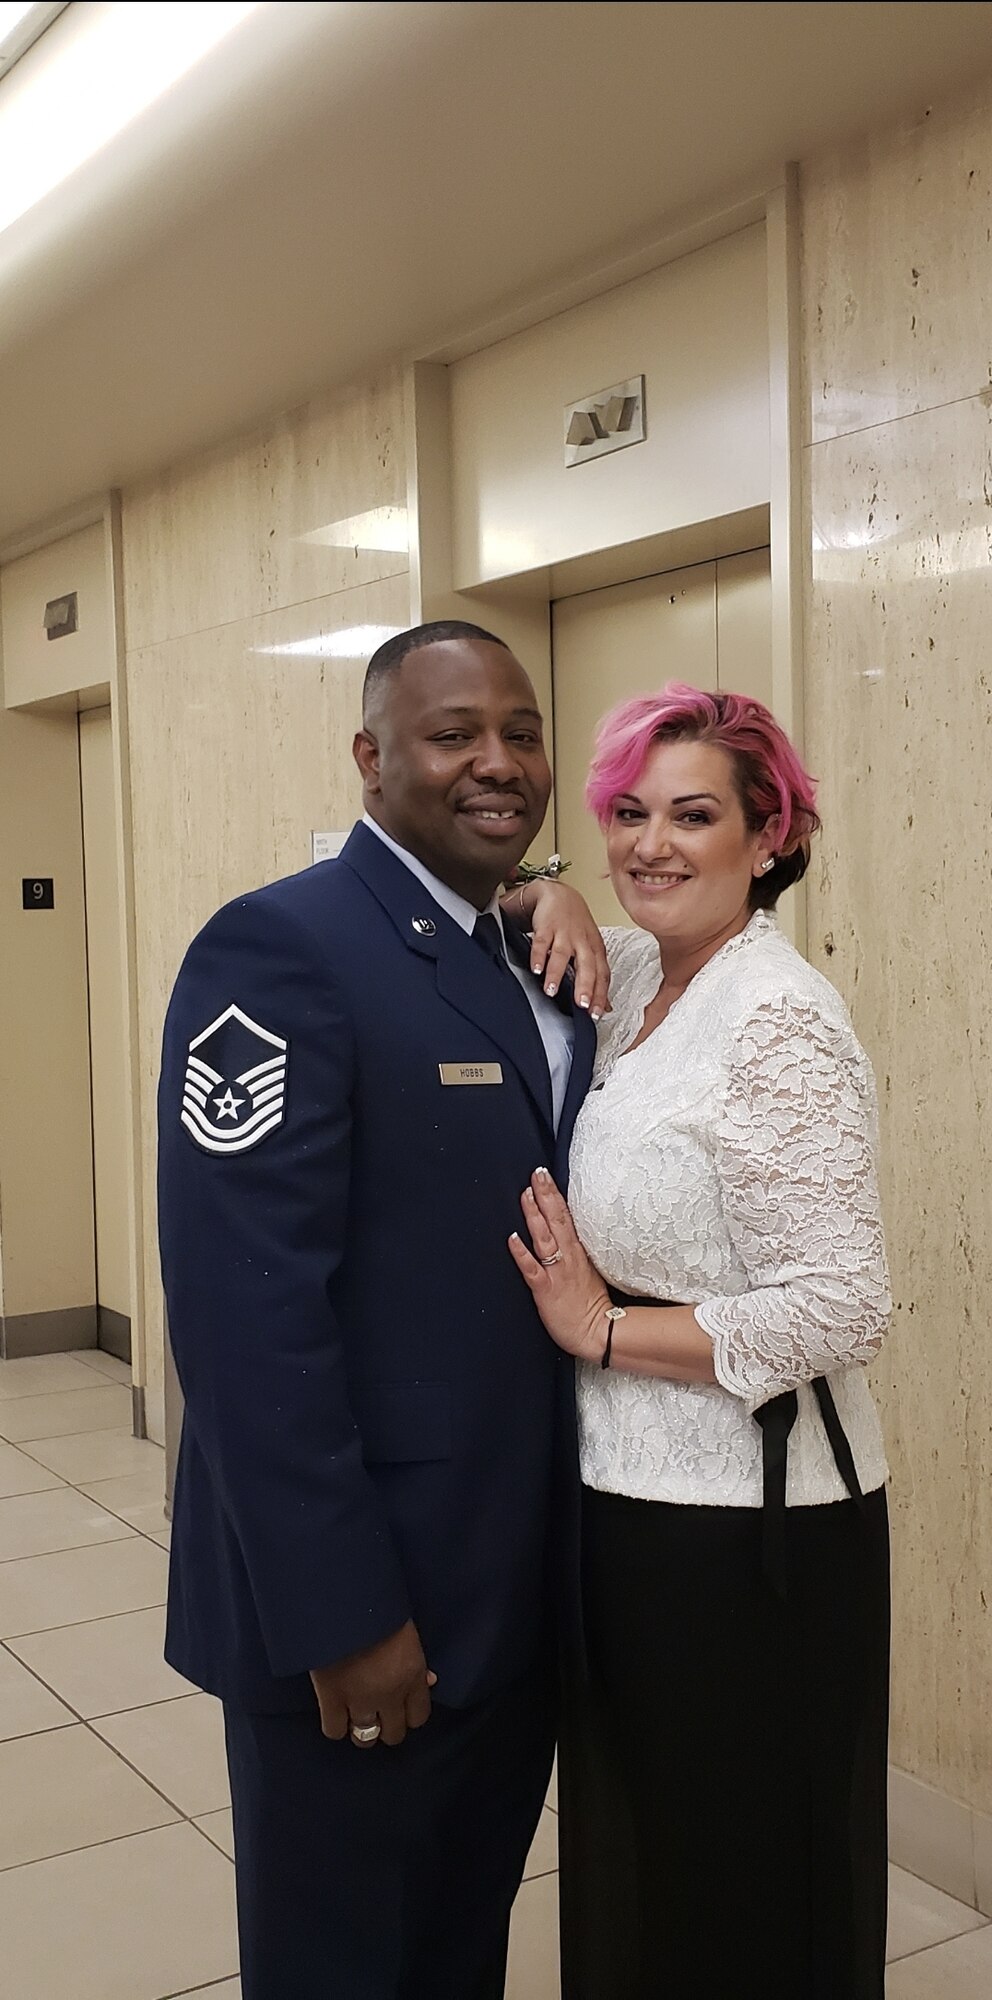 It was August of 2019 when Master Sgt. (ret) Davie Hobbs began experiencing symptoms of Post-Traumatic Stress Disorder (PTSD). The severity of his symptoms became evident one morning when he had a PTSD episode during a group staff meeting. Not knowing what the future would hold, it was at that very moment when Davie’s wife and Air Force Wounded Warrior (AFW2) caregiver, Misti Hobbs, knew PTSD had hit home and initiated the beginning of a new journey.